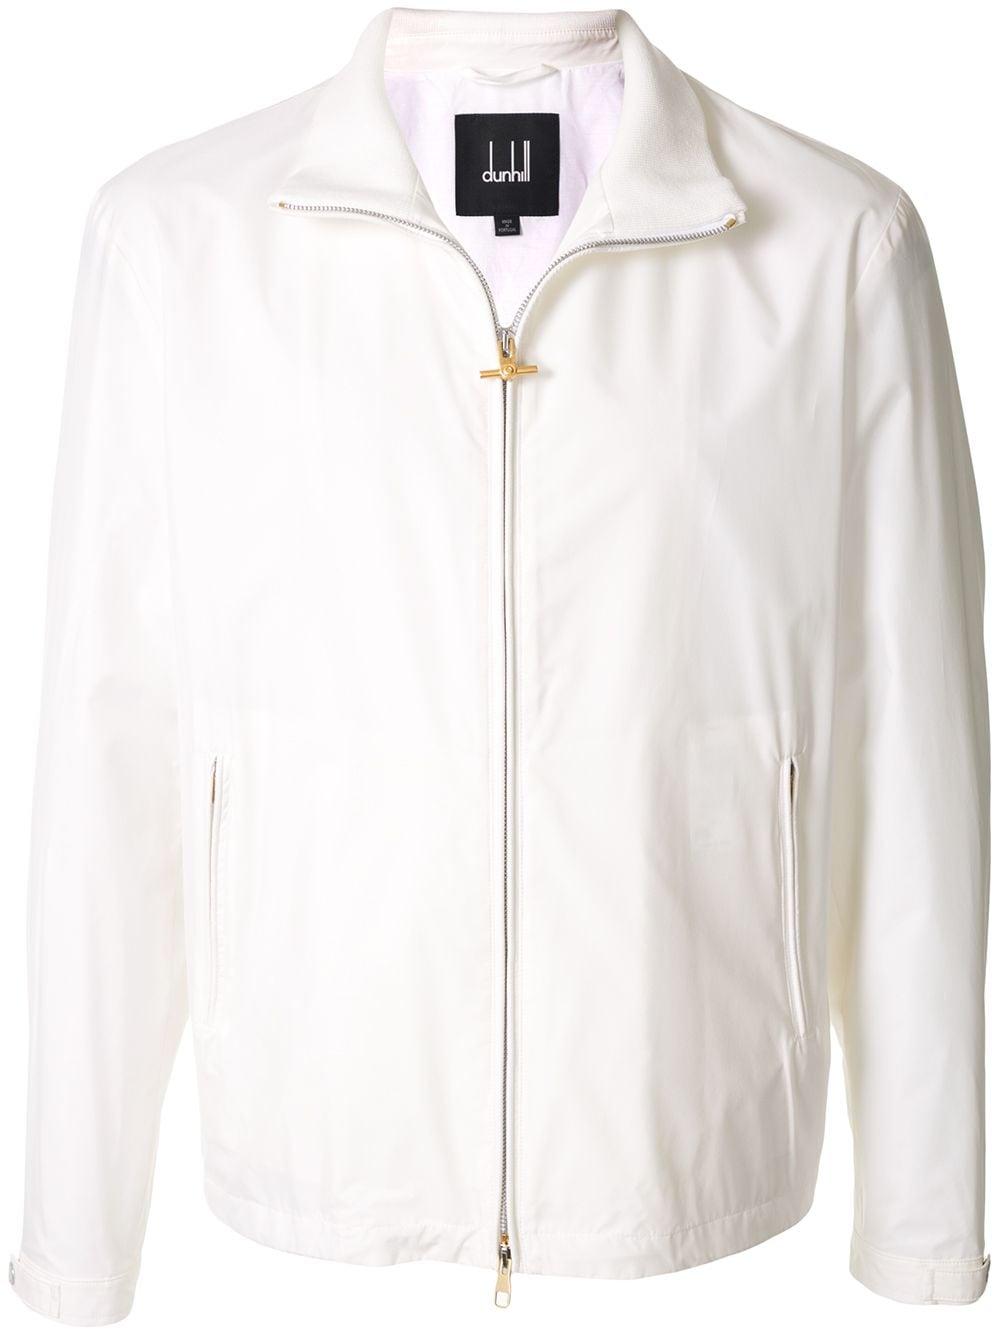 Dunhill Silk Spread Collar Jacket in White for Men - Lyst